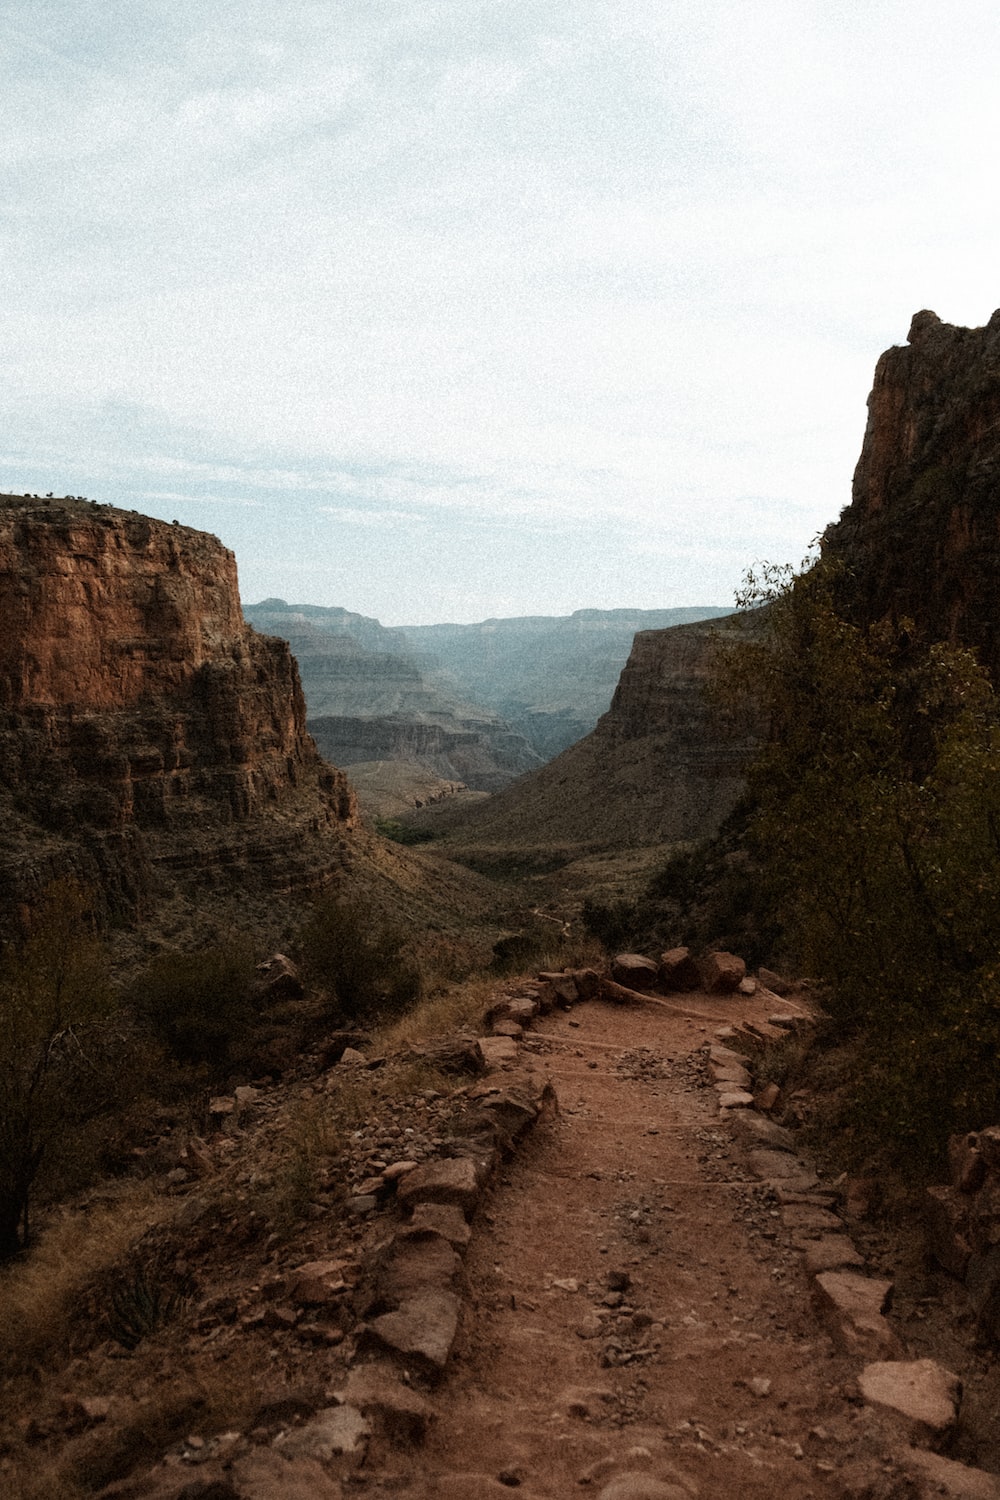  Explore the Grand Canyon: Plan Your Dream Trip Today!